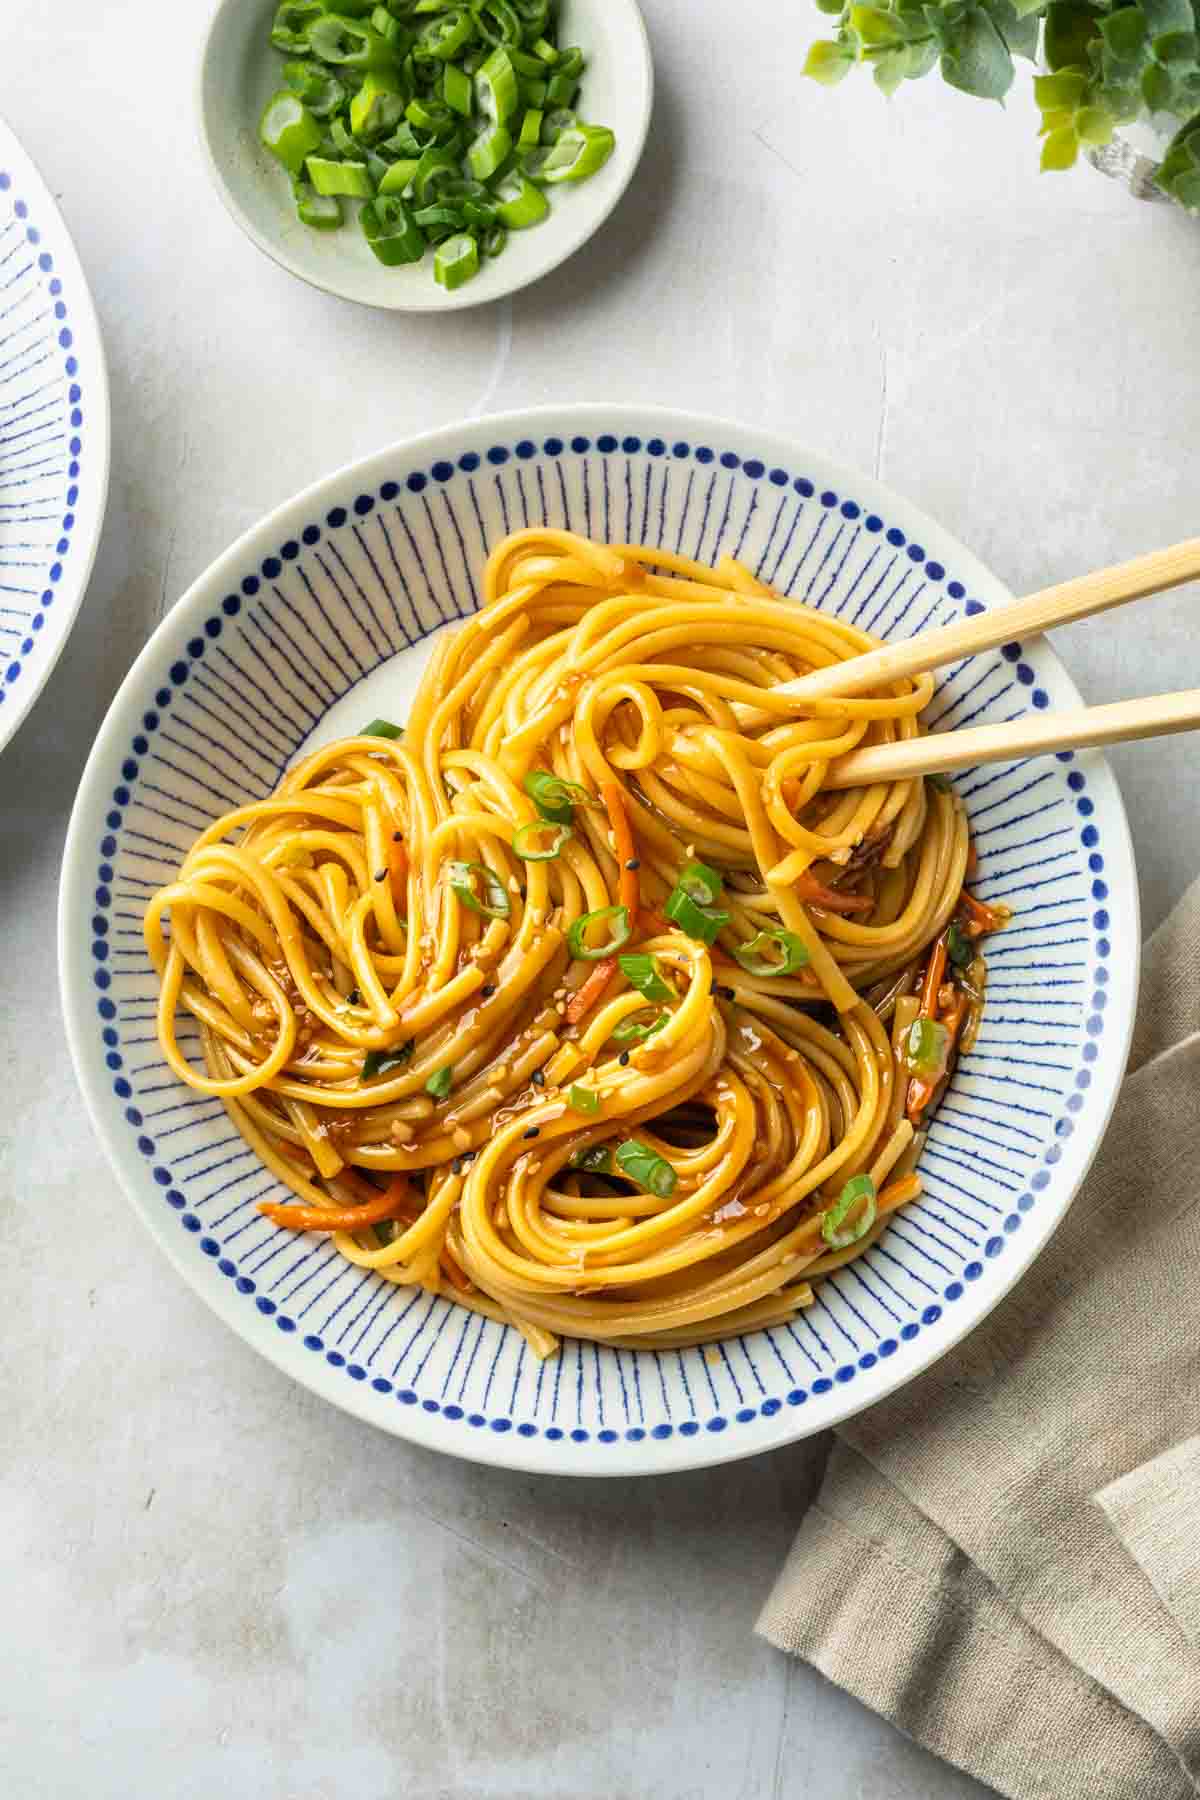 These teriyaki noodles are coated in a savory, honey teriyaki sauce and stir fried with sweet, tender carrots and aromatic green onions for a simple and satisfying noodle fix.      